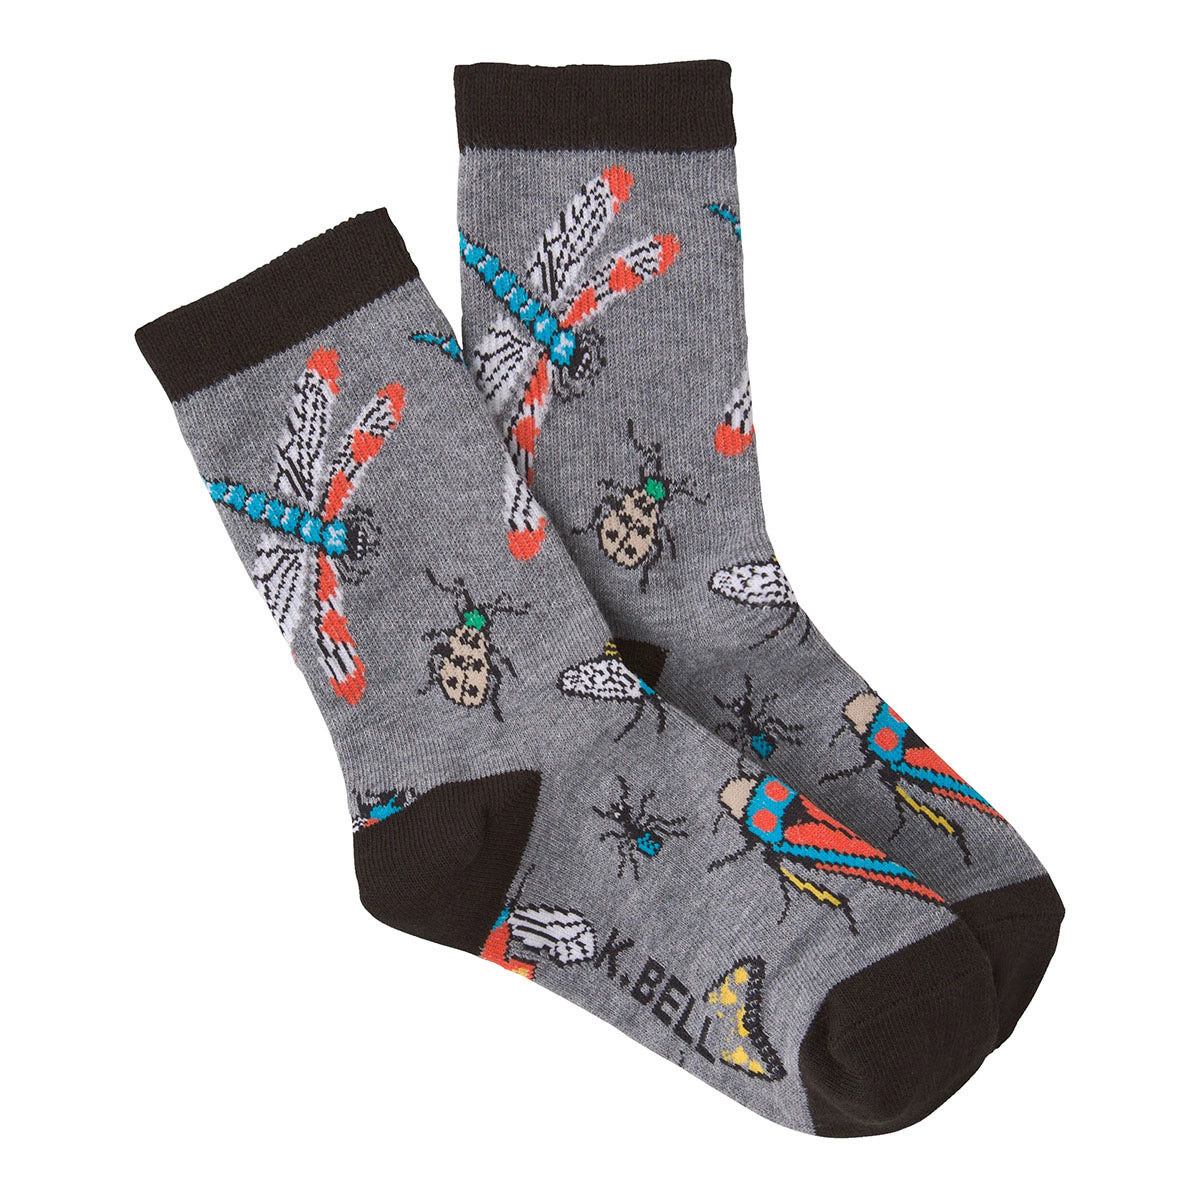 K BELL SOCKS INSECT CREW CHARCOAL